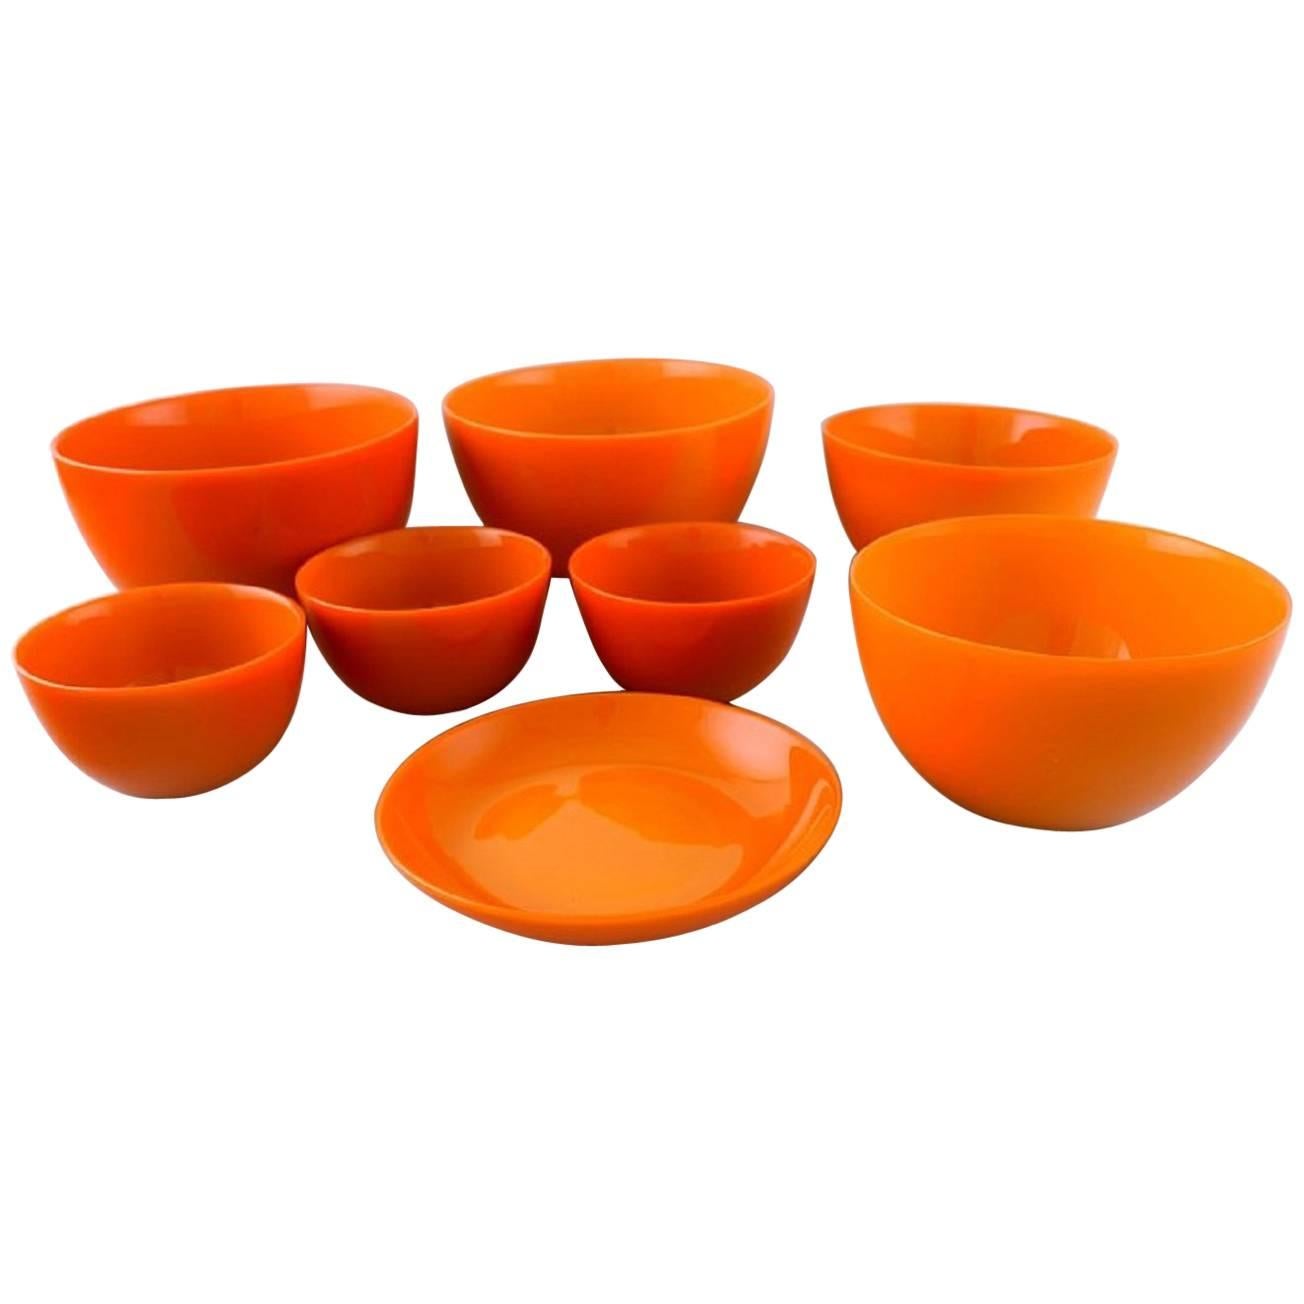 Orrefors "Colora" Eight Bowls in Art Glass in Orange, Designed by Sven Palmqvist